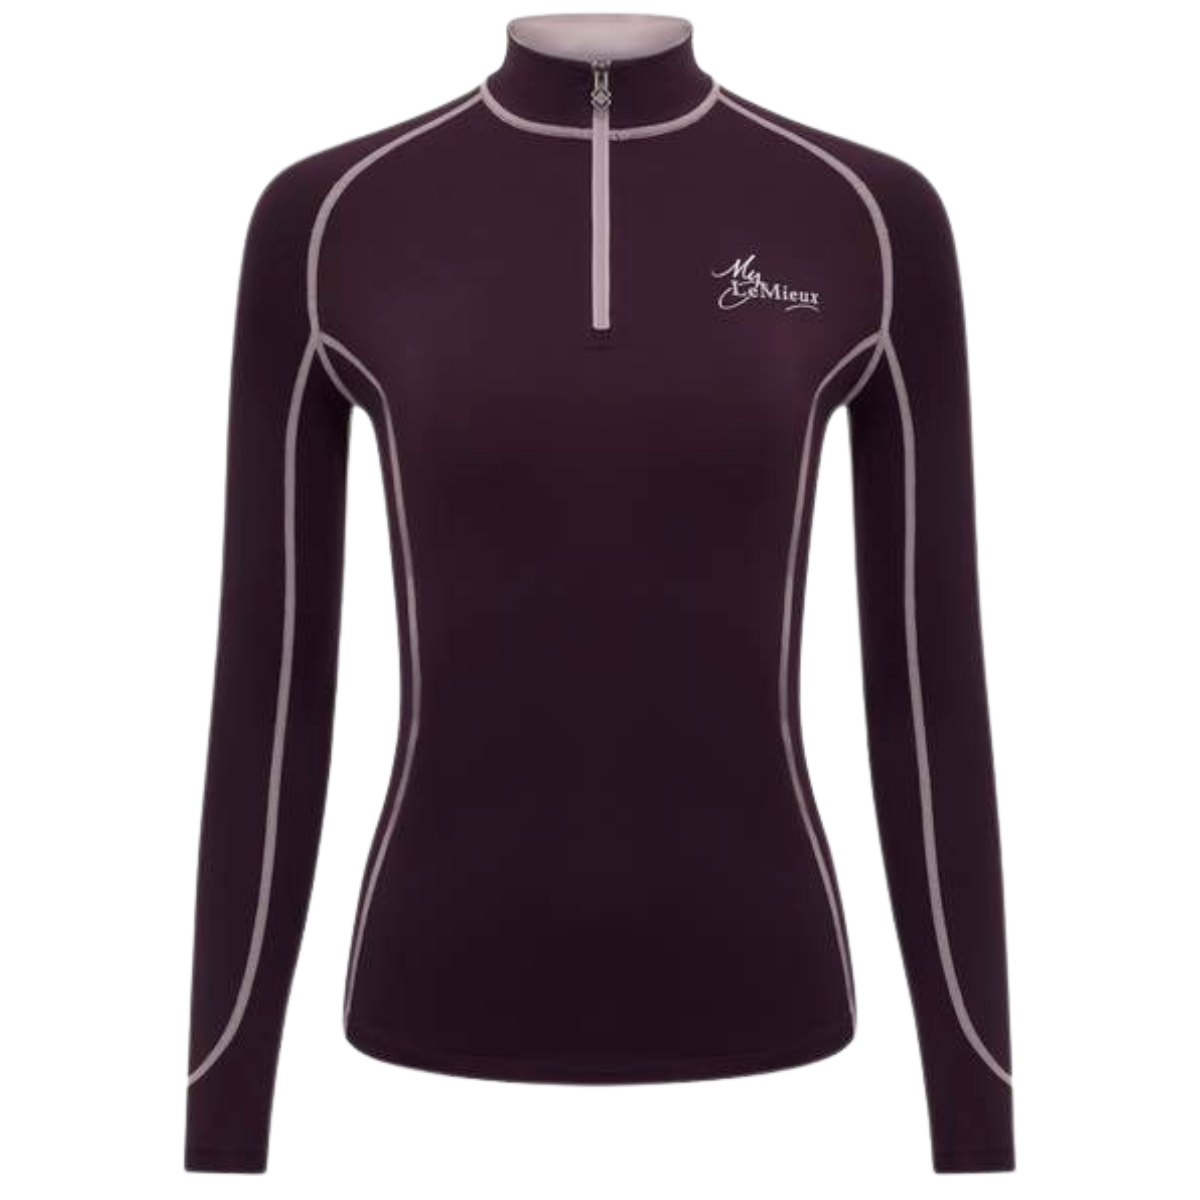 LeMieux Base Layer in Fig - Women's US 8